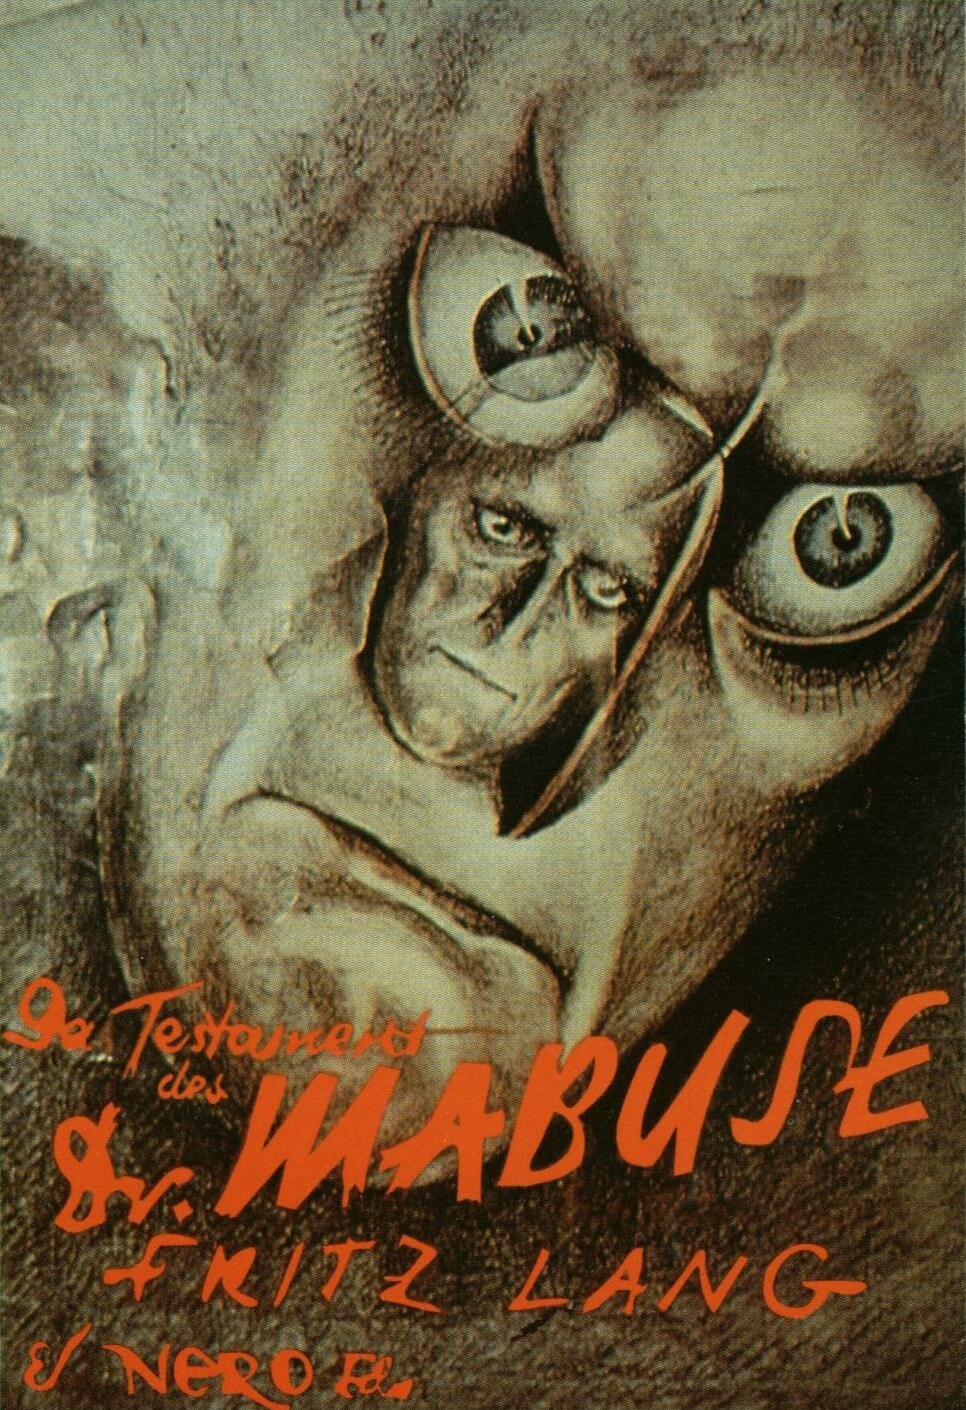 German poster of the movie The Testament of Dr. Mabuse